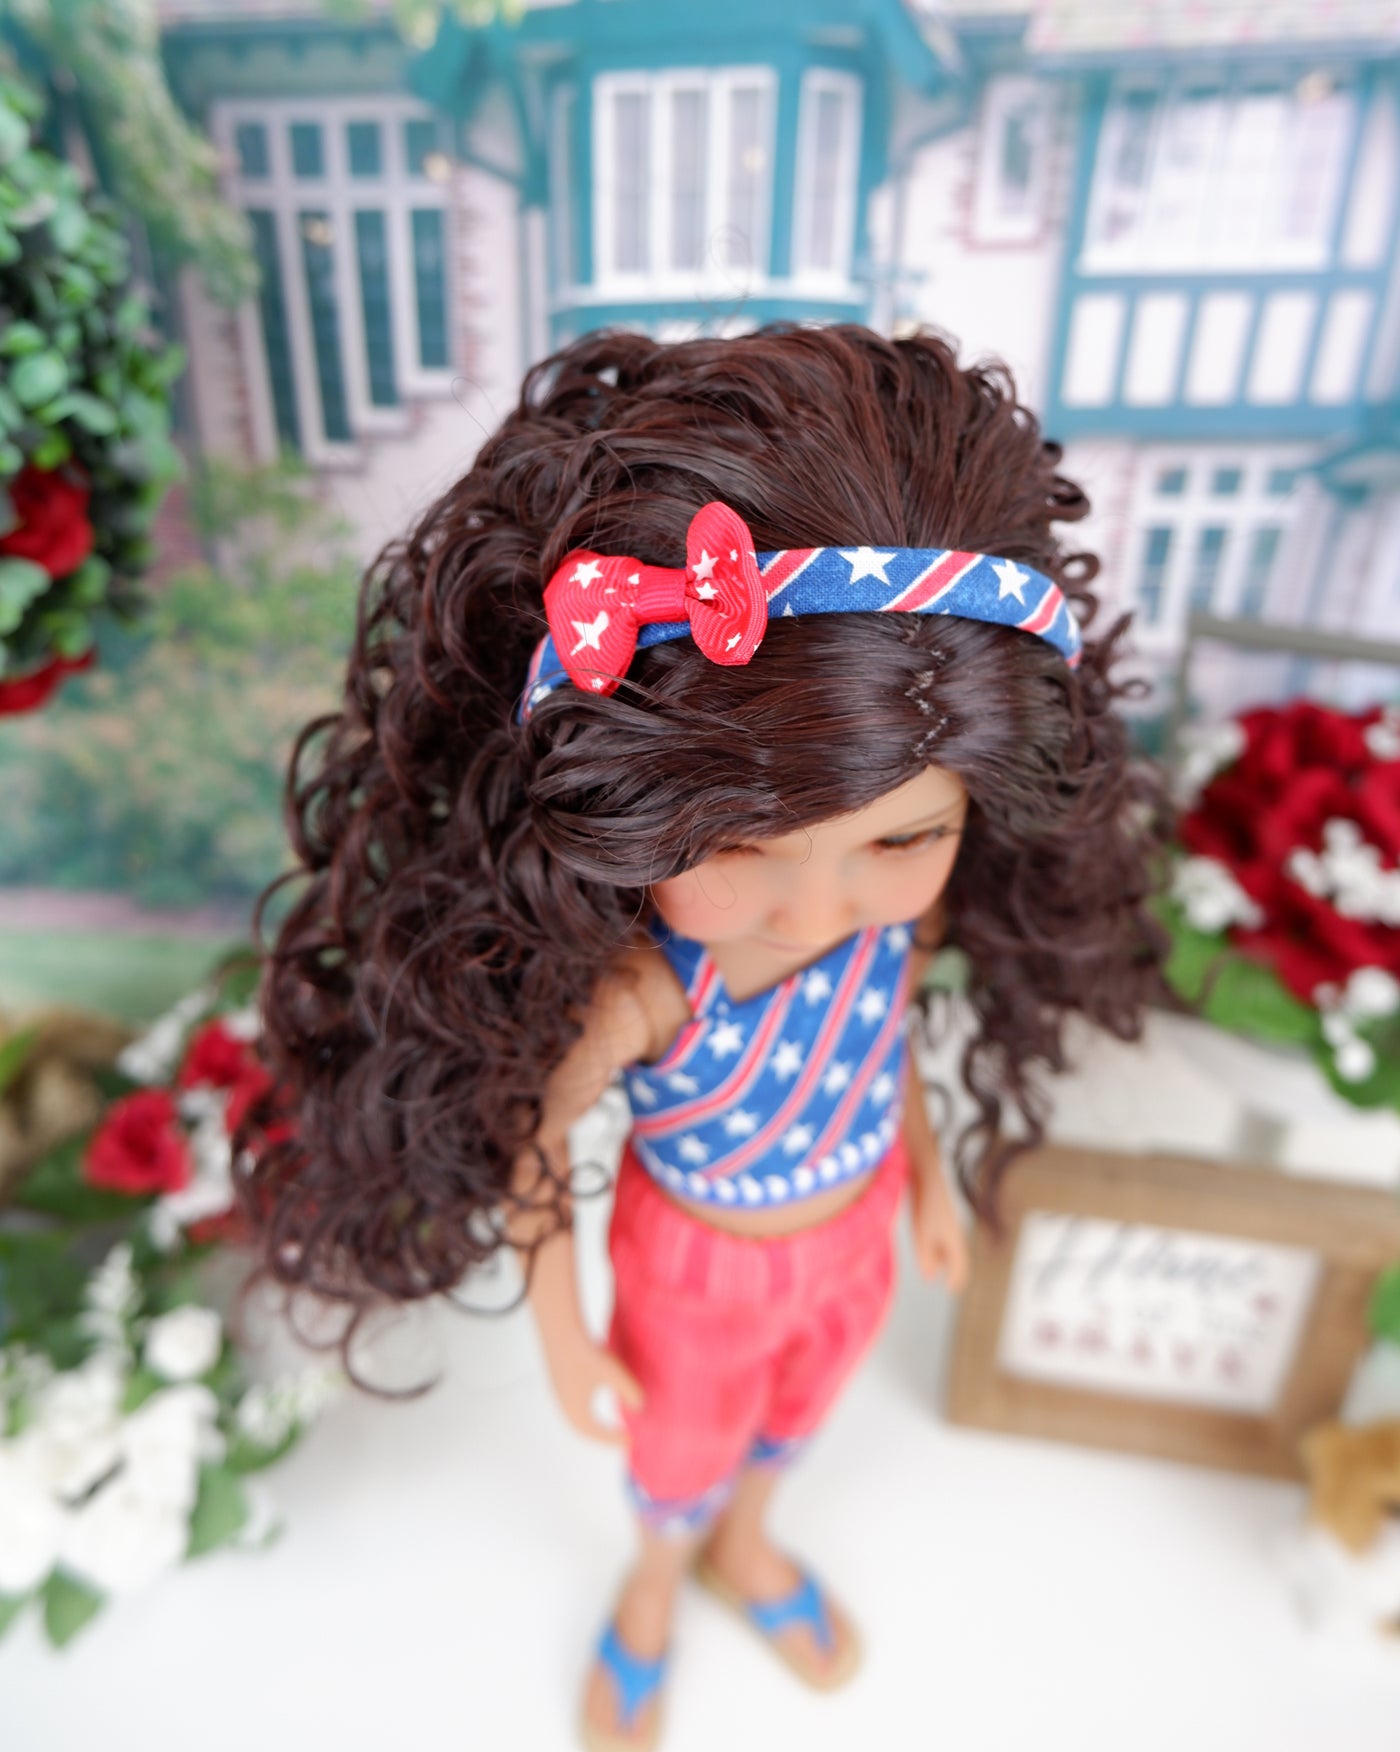 Star Spangled Cutie - crop top & capris with shoes for Ruby Red Fashion Friends doll